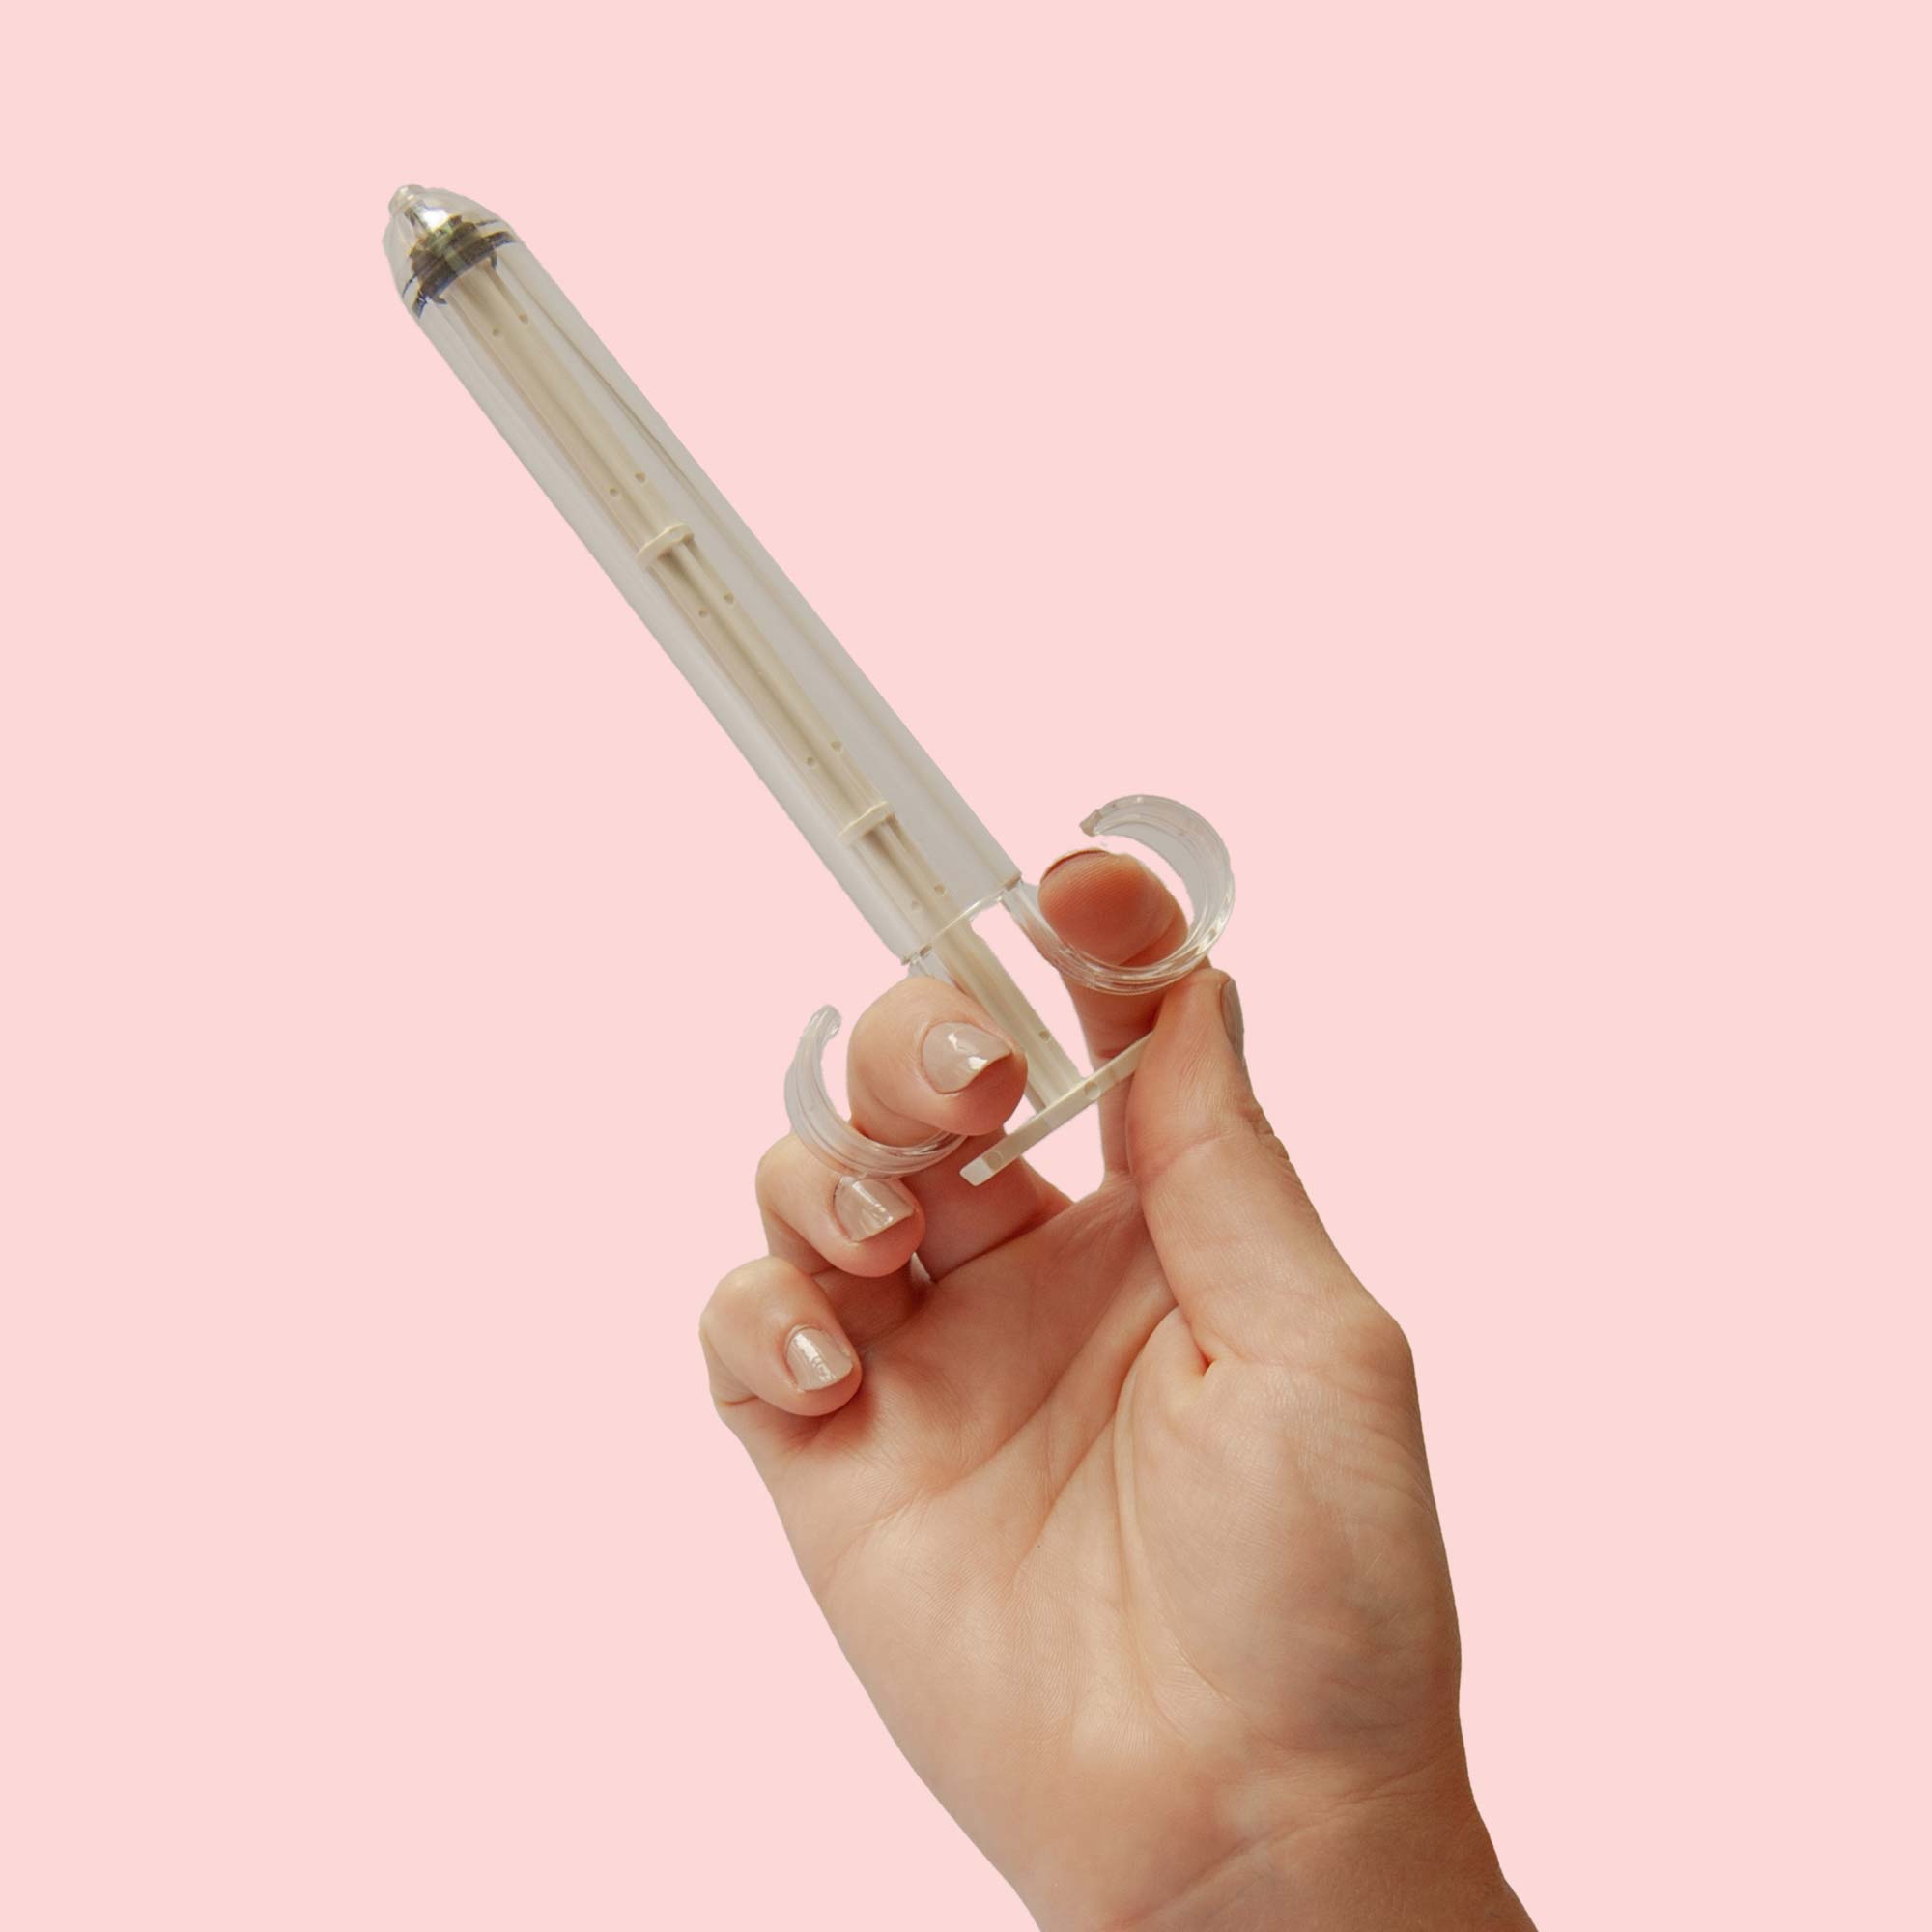 A woman's hand holding the Pherdal insemination syringe in front of a pink background